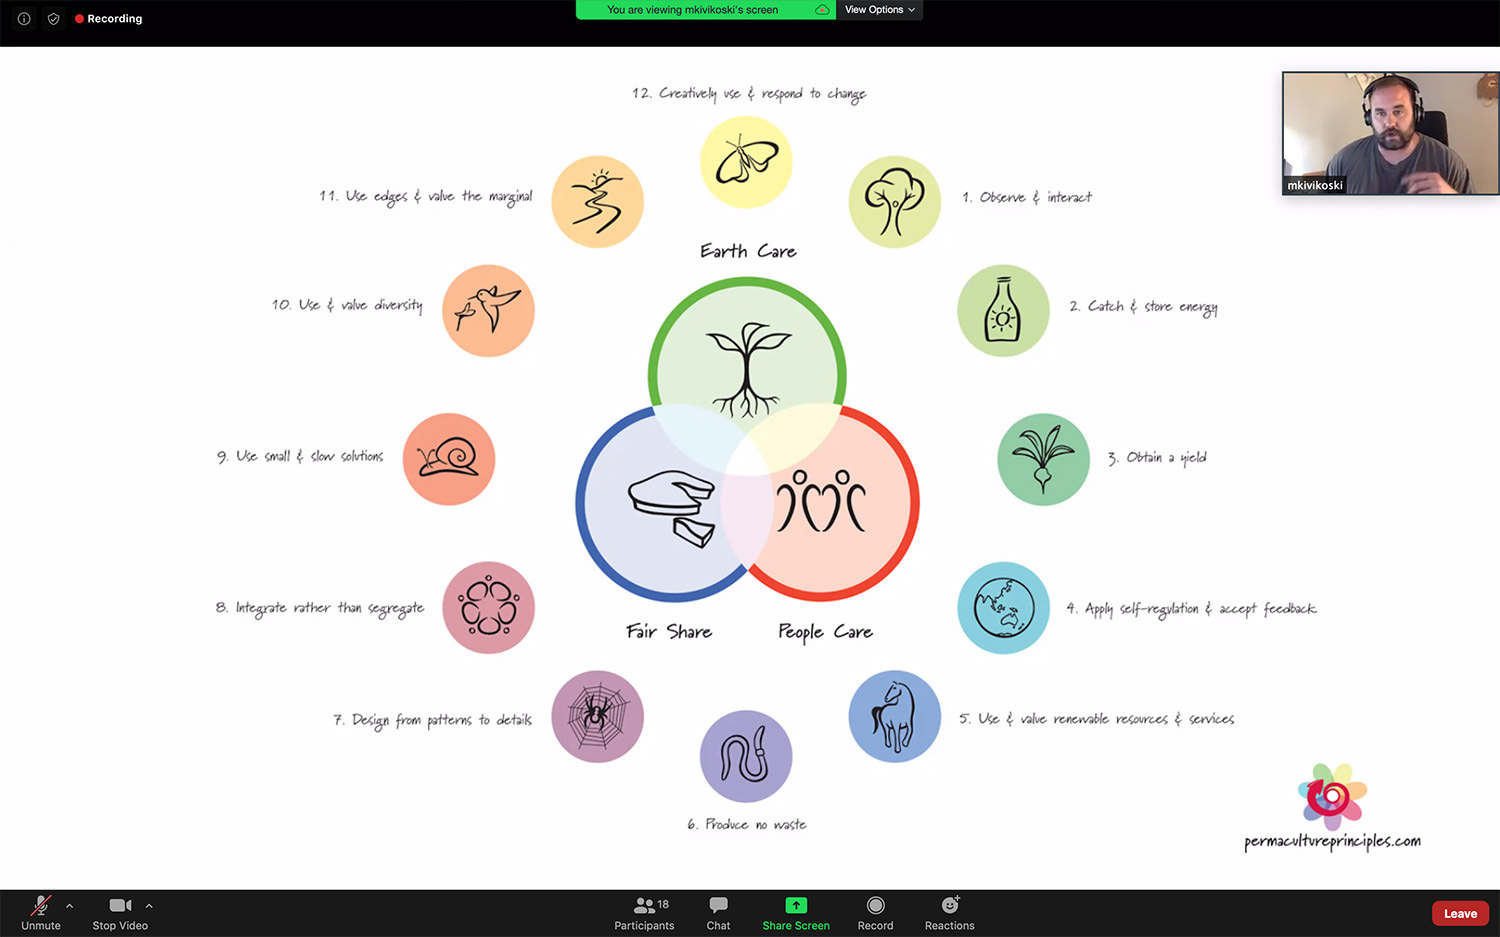 Zoom screenshot of Venn diagram representing permaculture principles with male Cantinista presenter video capture in thumbnail image in upper right.